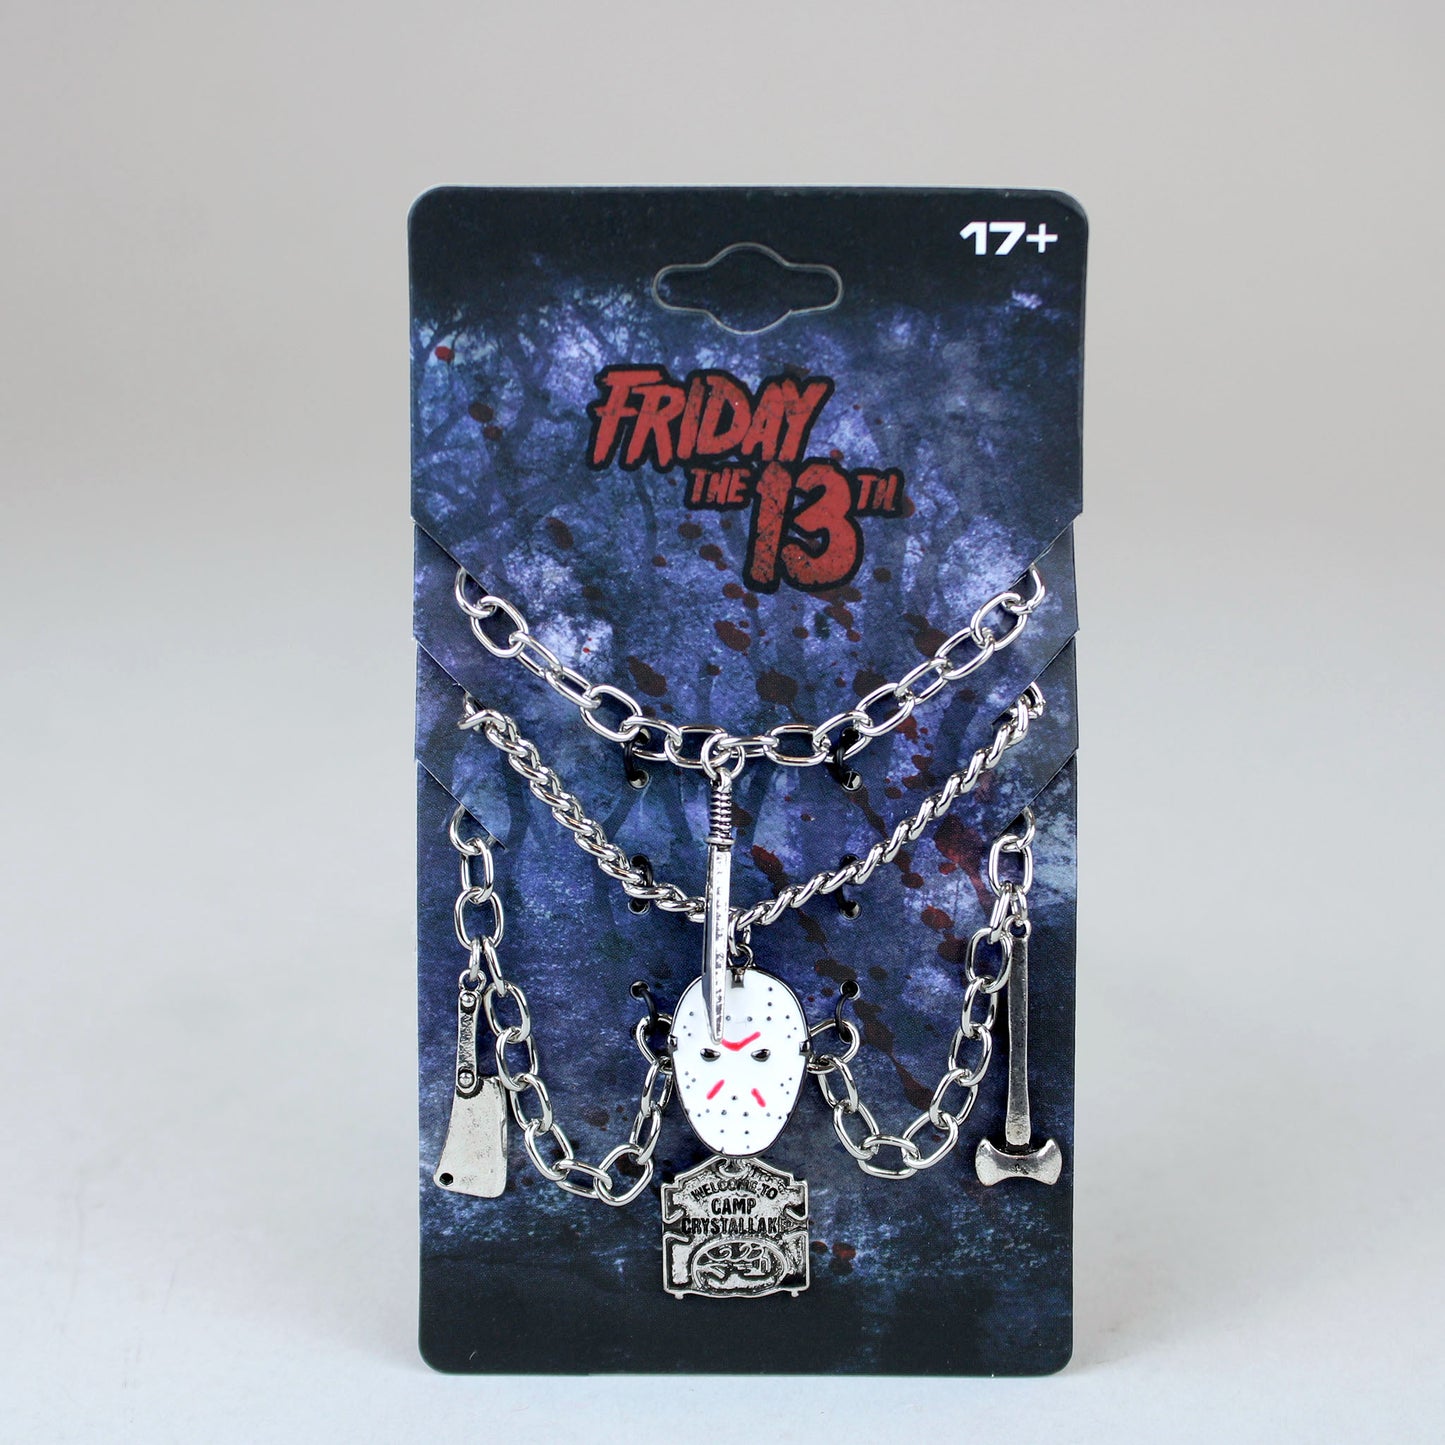 Jason Voorhees (Friday the 13th) Multi Layer Charm Necklace